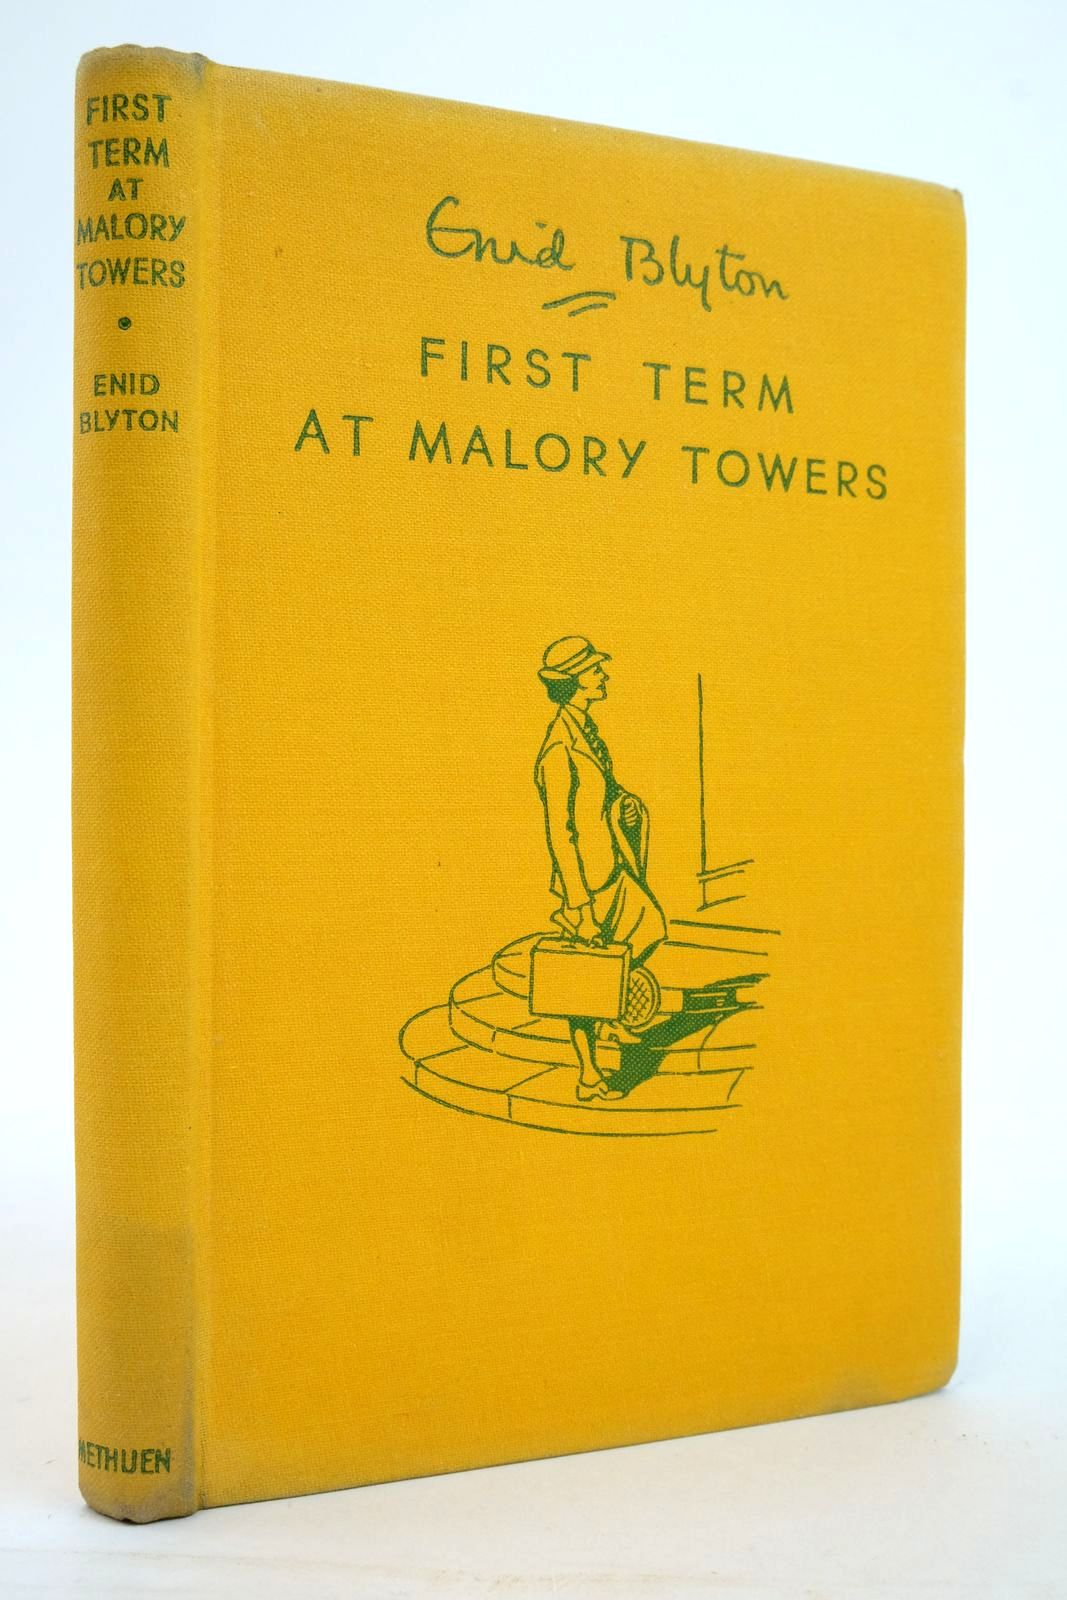 Photo of FIRST TERM AT MALORY TOWERS written by Blyton, Enid illustrated by Lloyd, Stanley published by Methuen & Co. Ltd. (STOCK CODE: 2137440)  for sale by Stella & Rose's Books